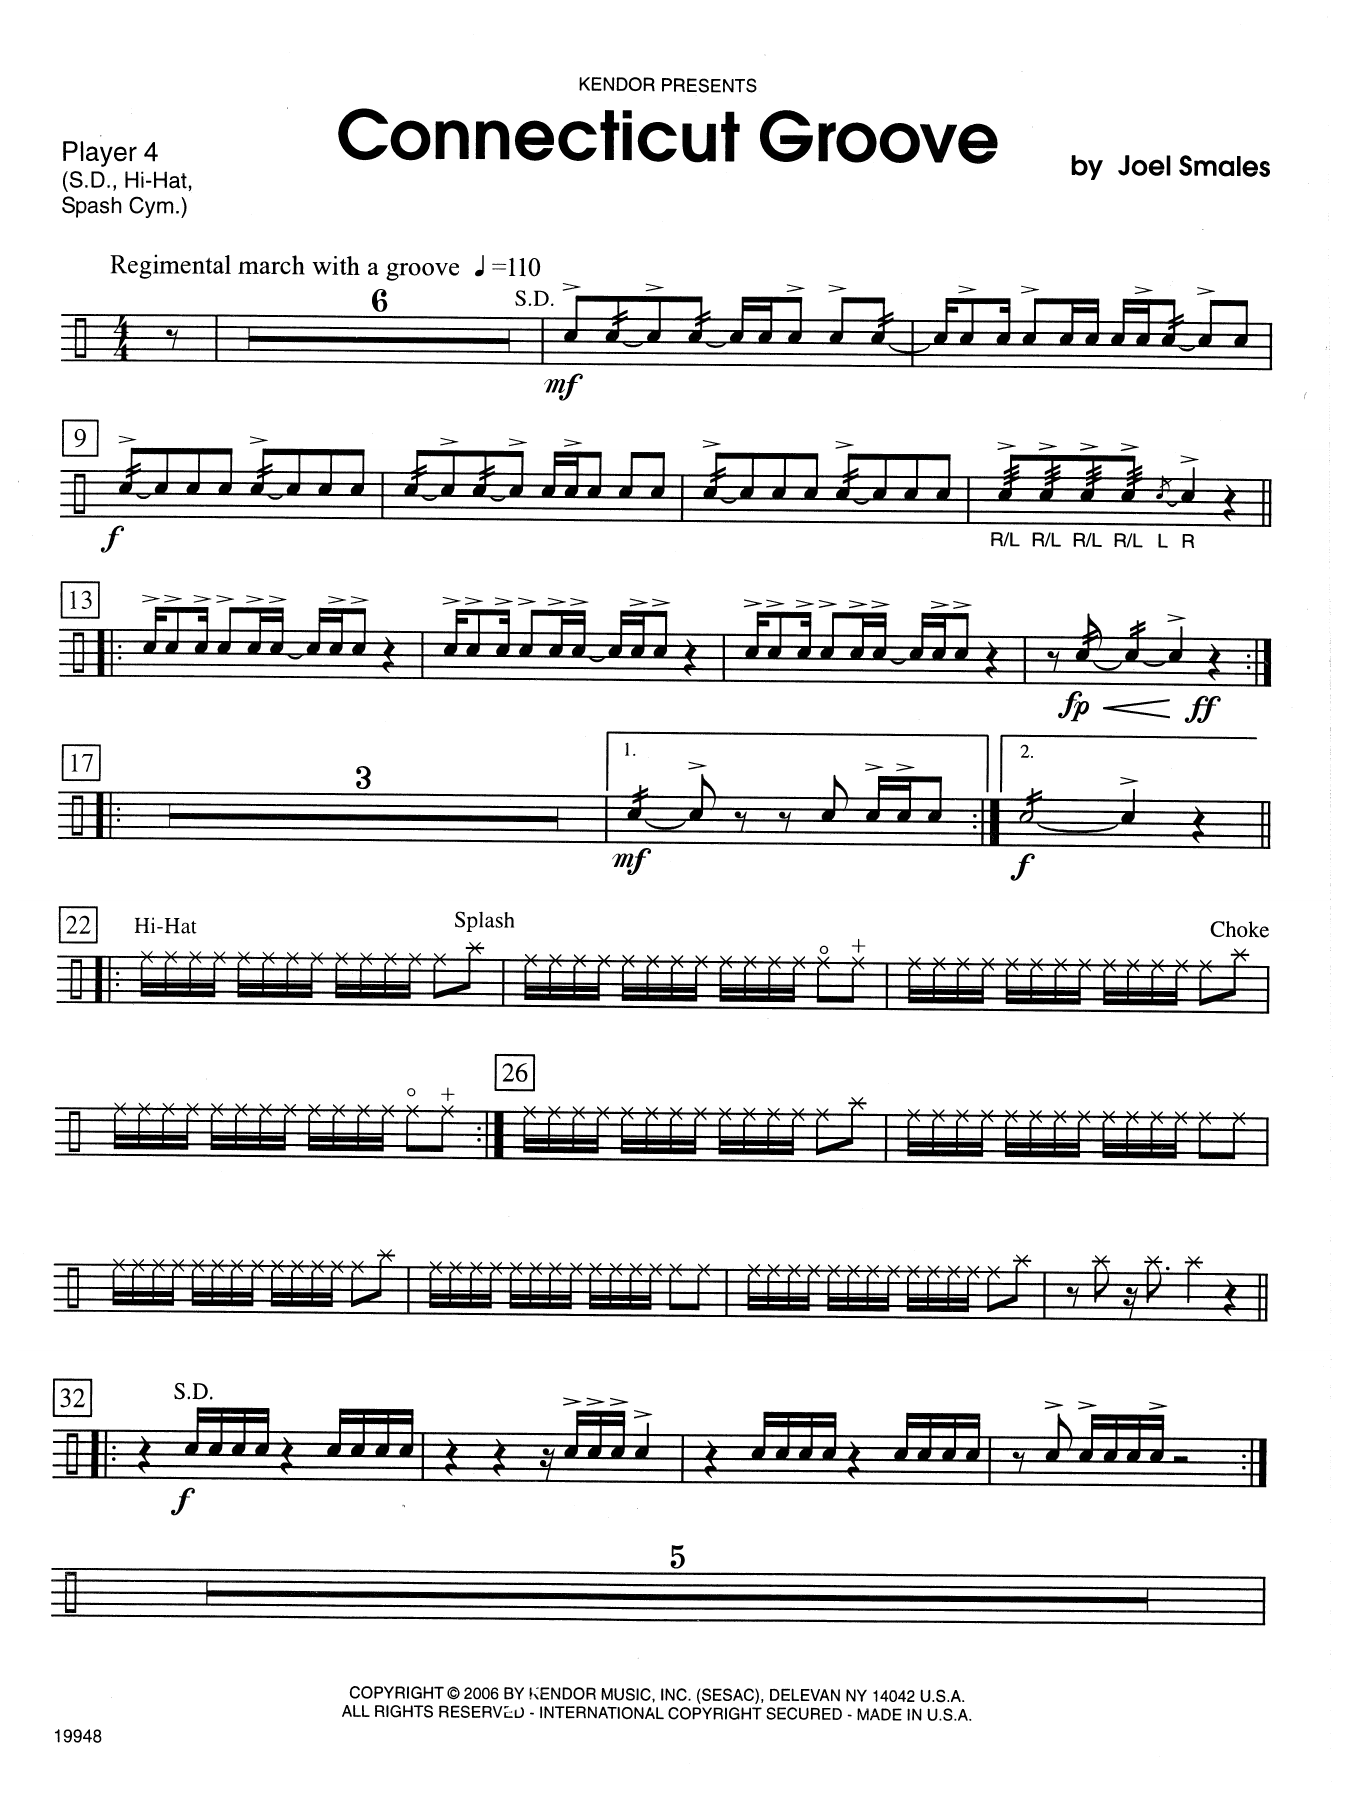 Download Joel Smales Connecticut Groove - Percussion 4 Sheet Music